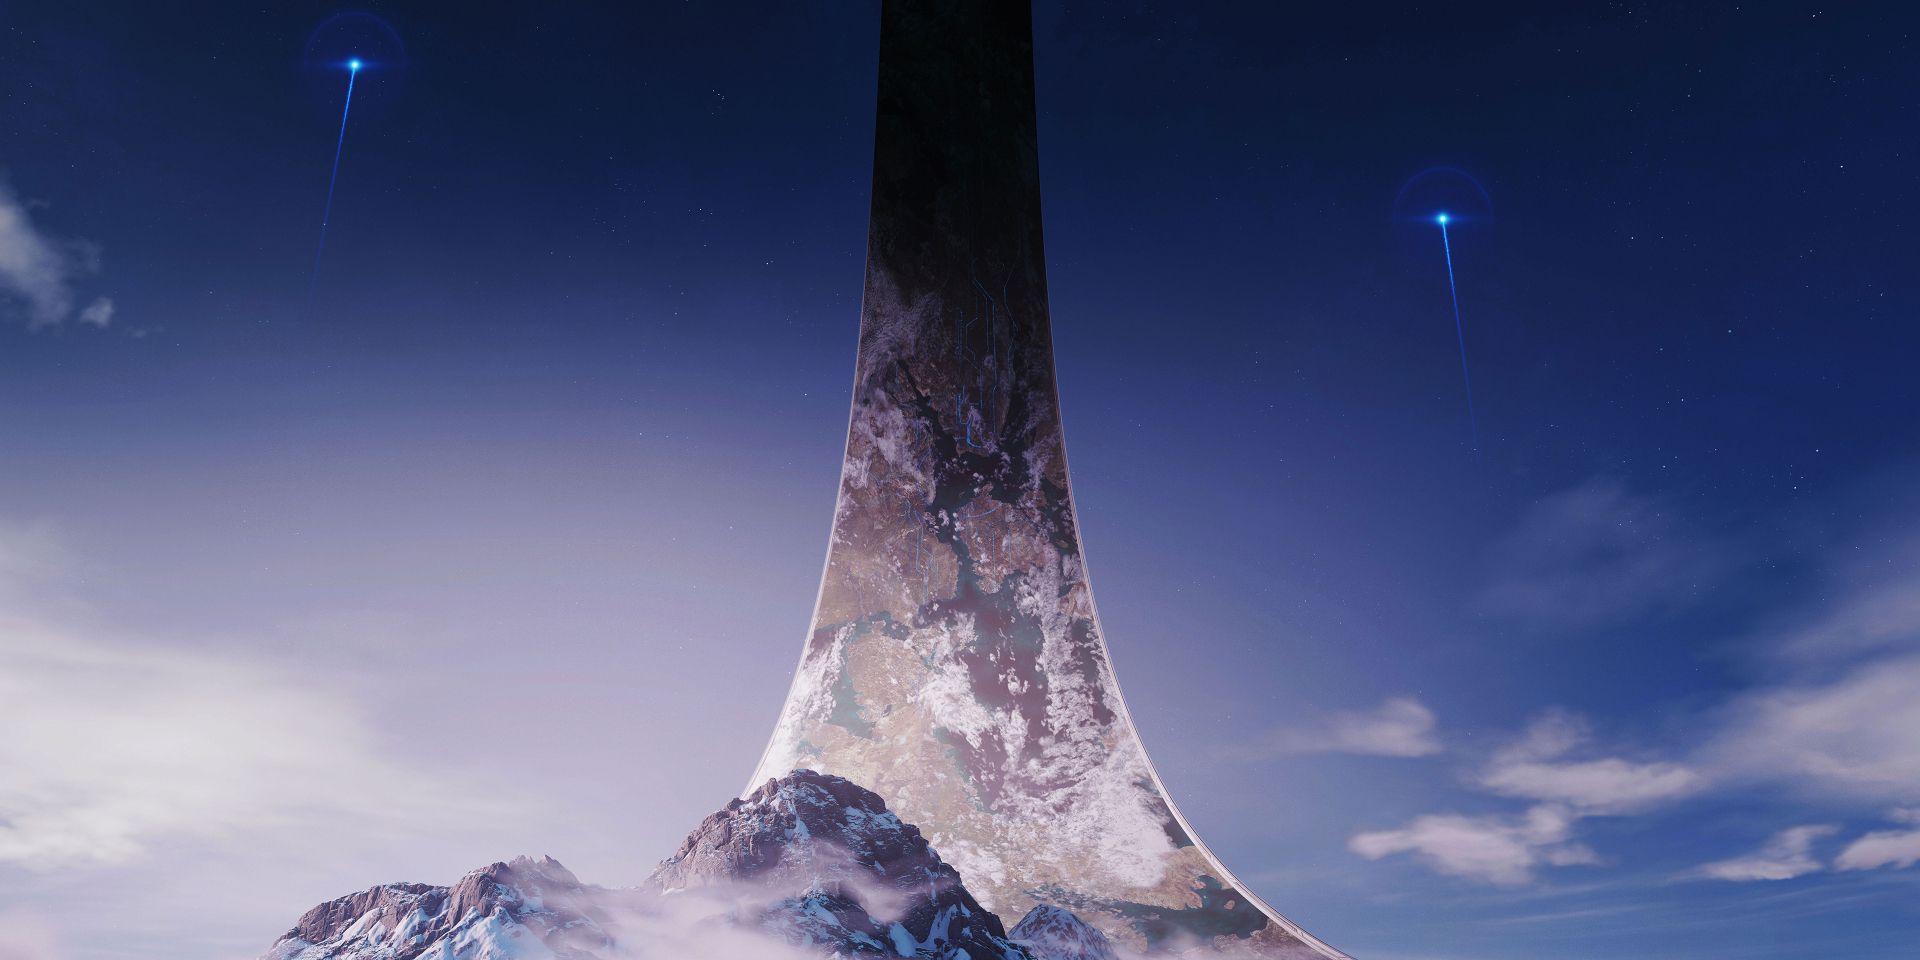 Promotional image for the video game Halo Infinite.